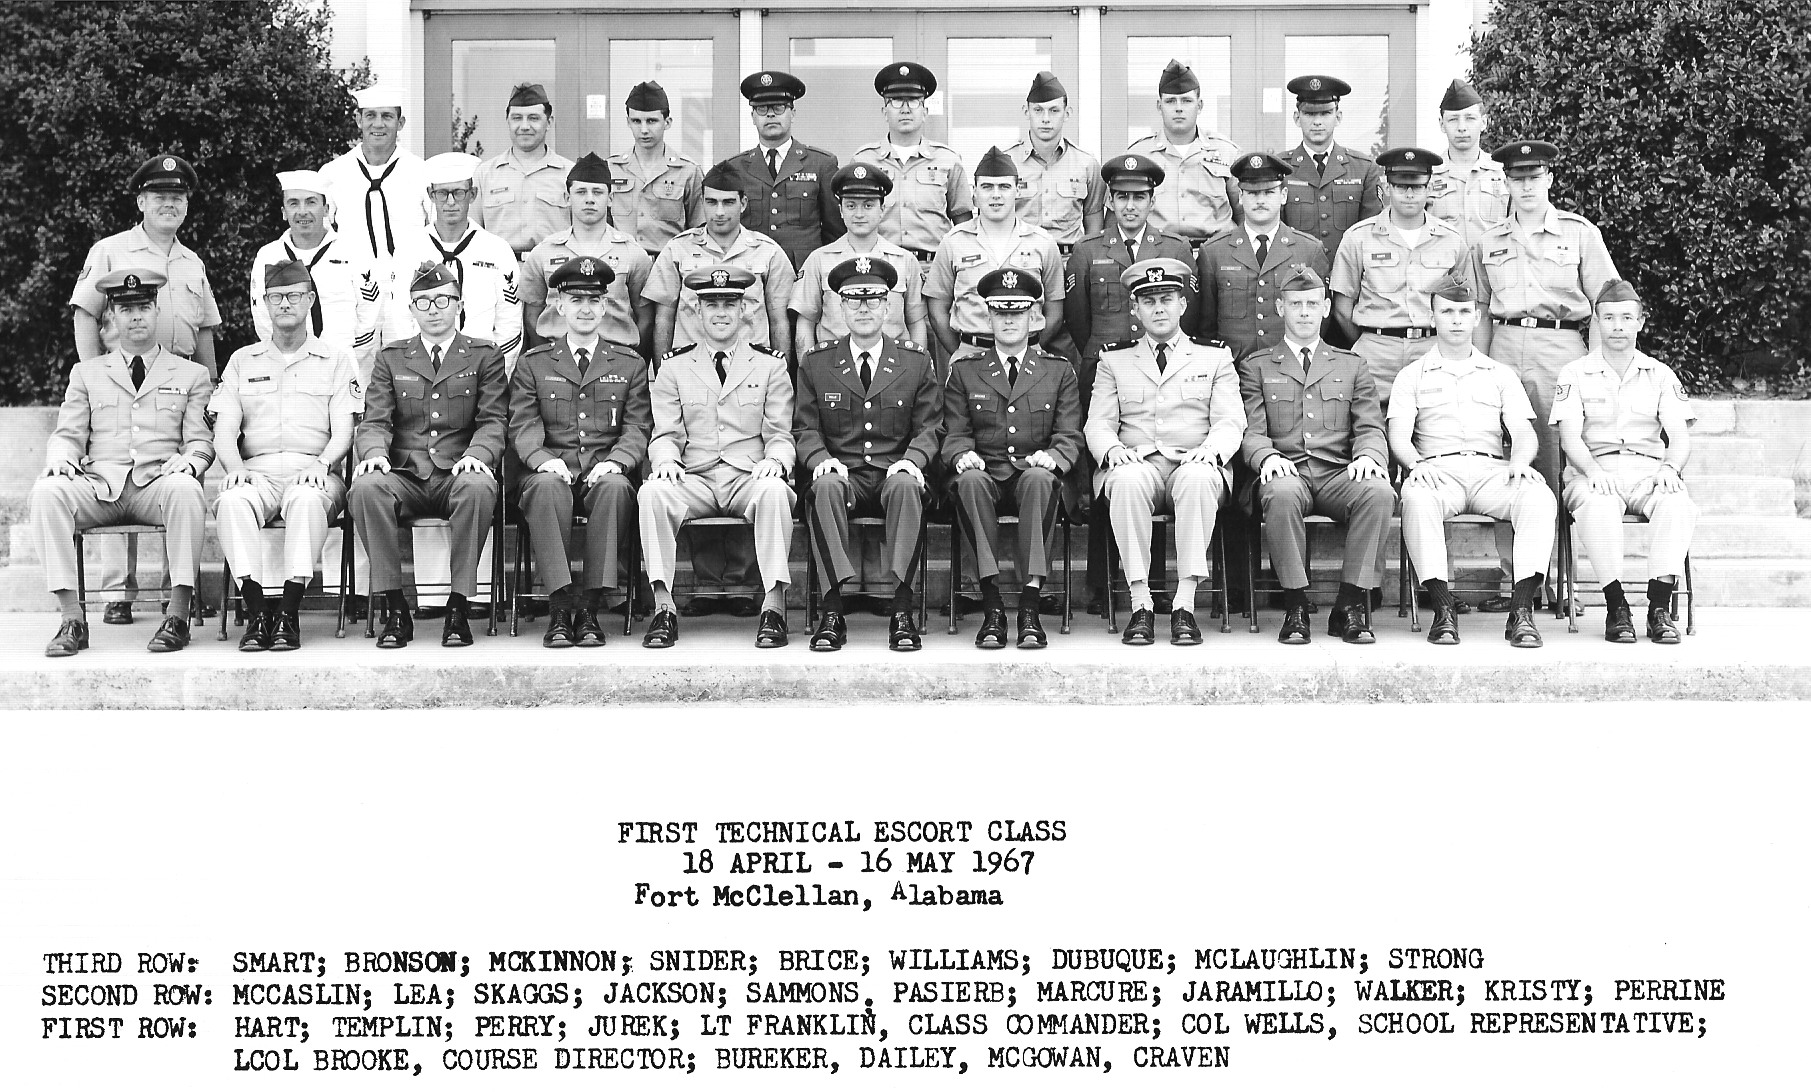 First Technical Escort Class May 1967 brand new WO1 front row 4th from the right.